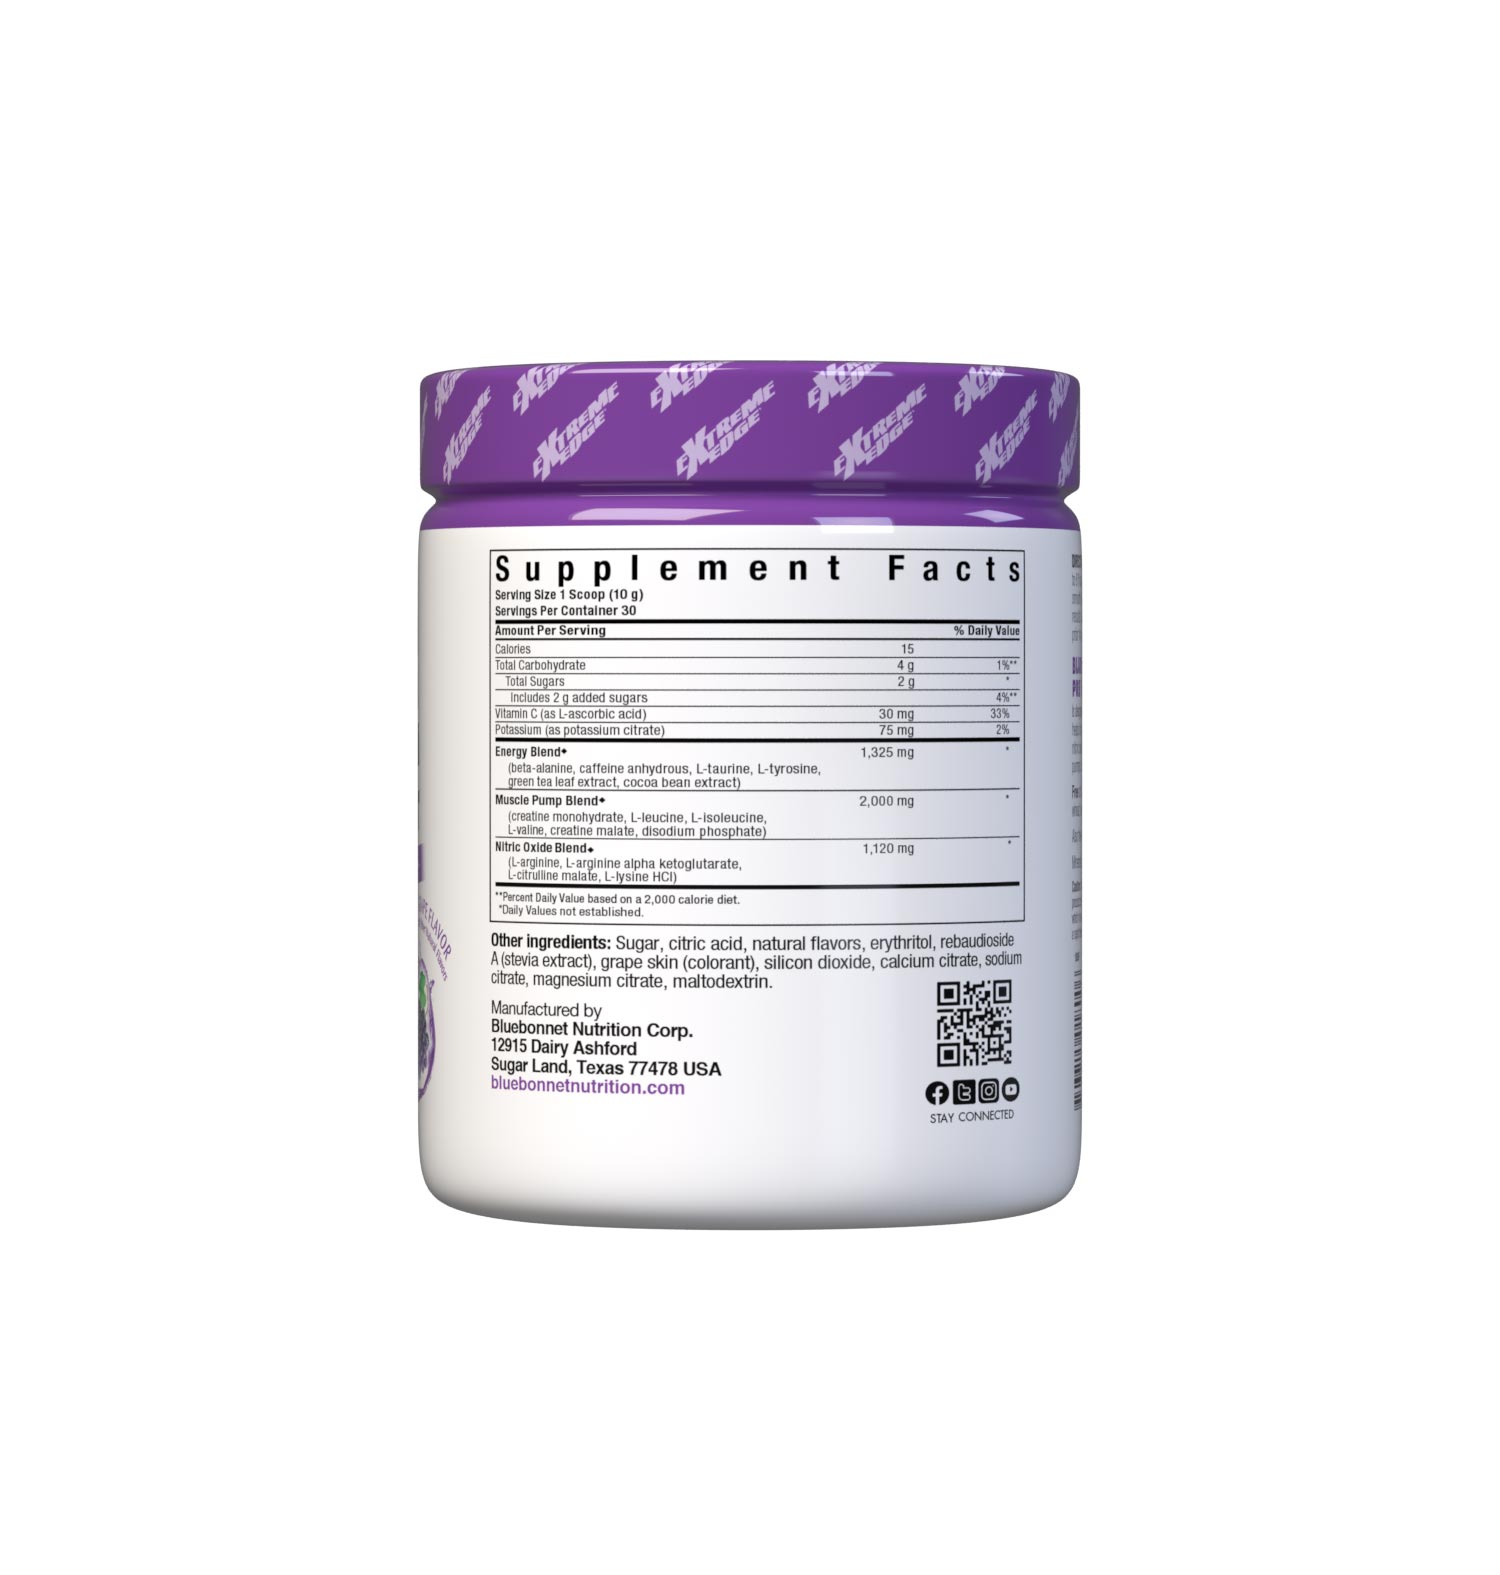 Bluebonnet's Grape Flavored Pre Workout powder is designed to be one of the most comprehensive, muscle recharging formulas ever created. This triple-turbo, super-charged formula generates high energy, sharpens mental concentration, and increases nitric oxide (NO) levels for greater blood flow and intense muscle pumps. Supplement facts panel. #size_0.66 lb